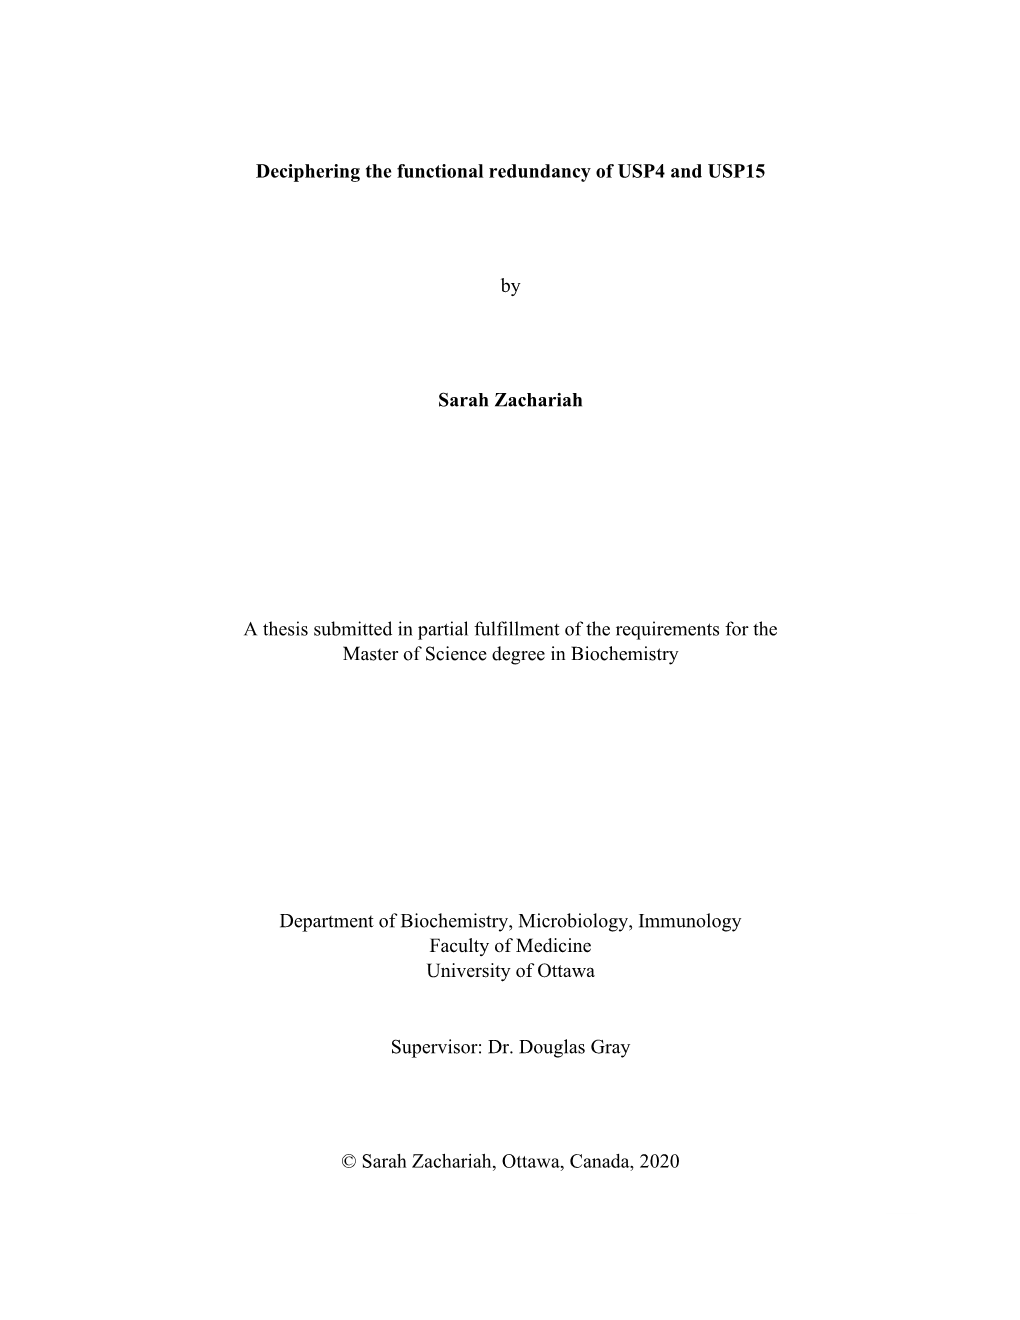 Deciphering the Functional Redundancy of USP4 and USP15 by Sarah Zachariah a Thesis Submitted in Partial Fulfillment of the Requ